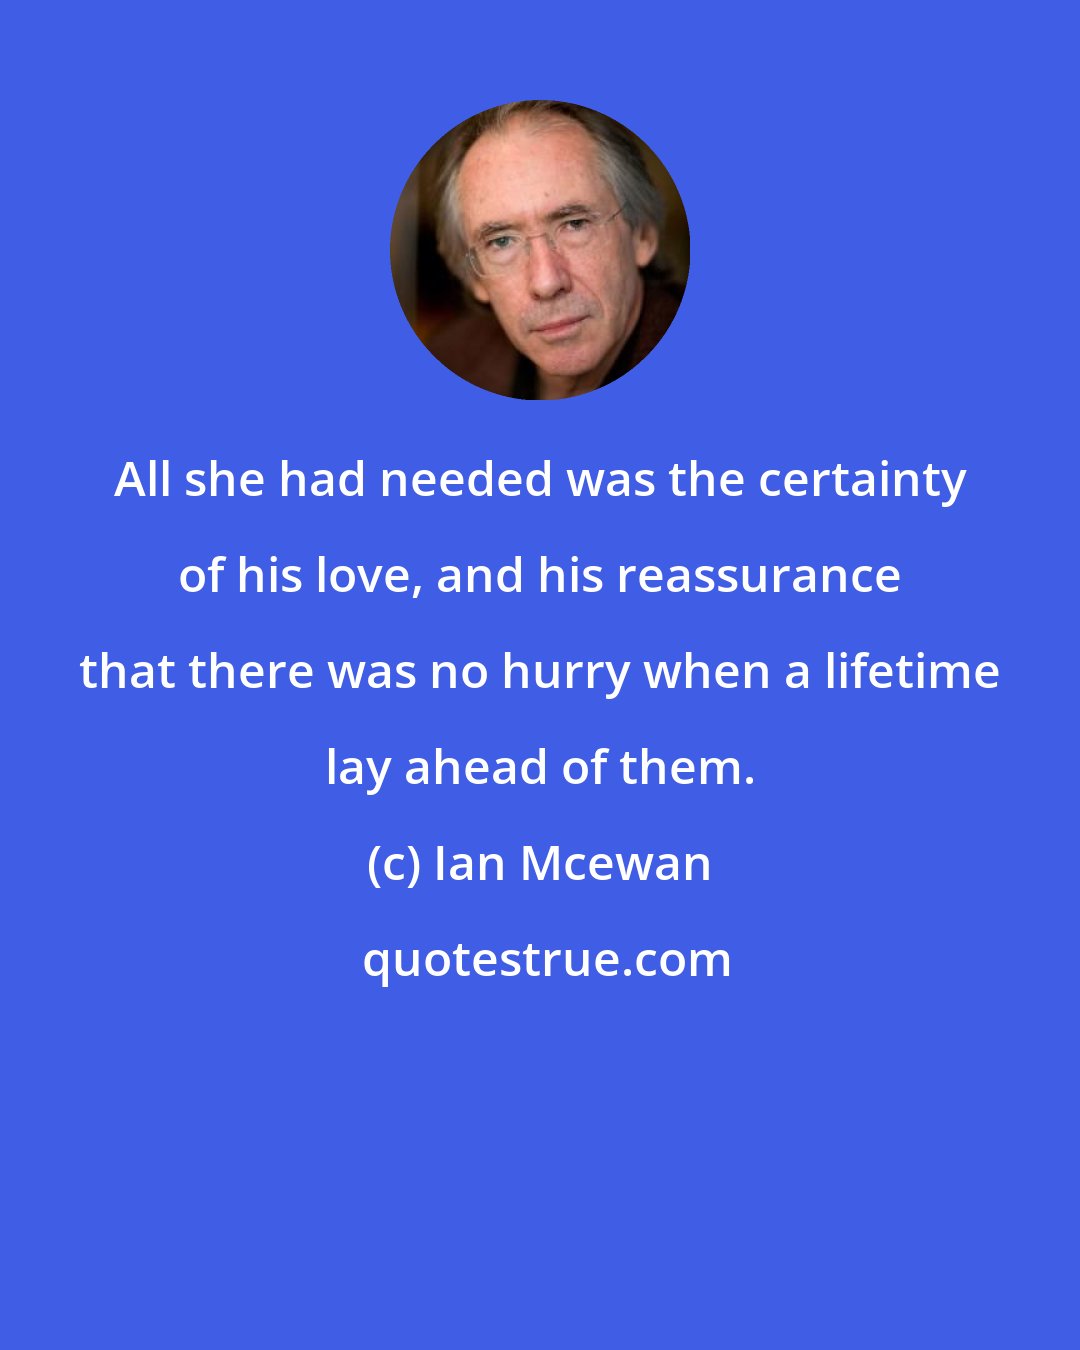 Ian Mcewan: All she had needed was the certainty of his love, and his reassurance that there was no hurry when a lifetime lay ahead of them.